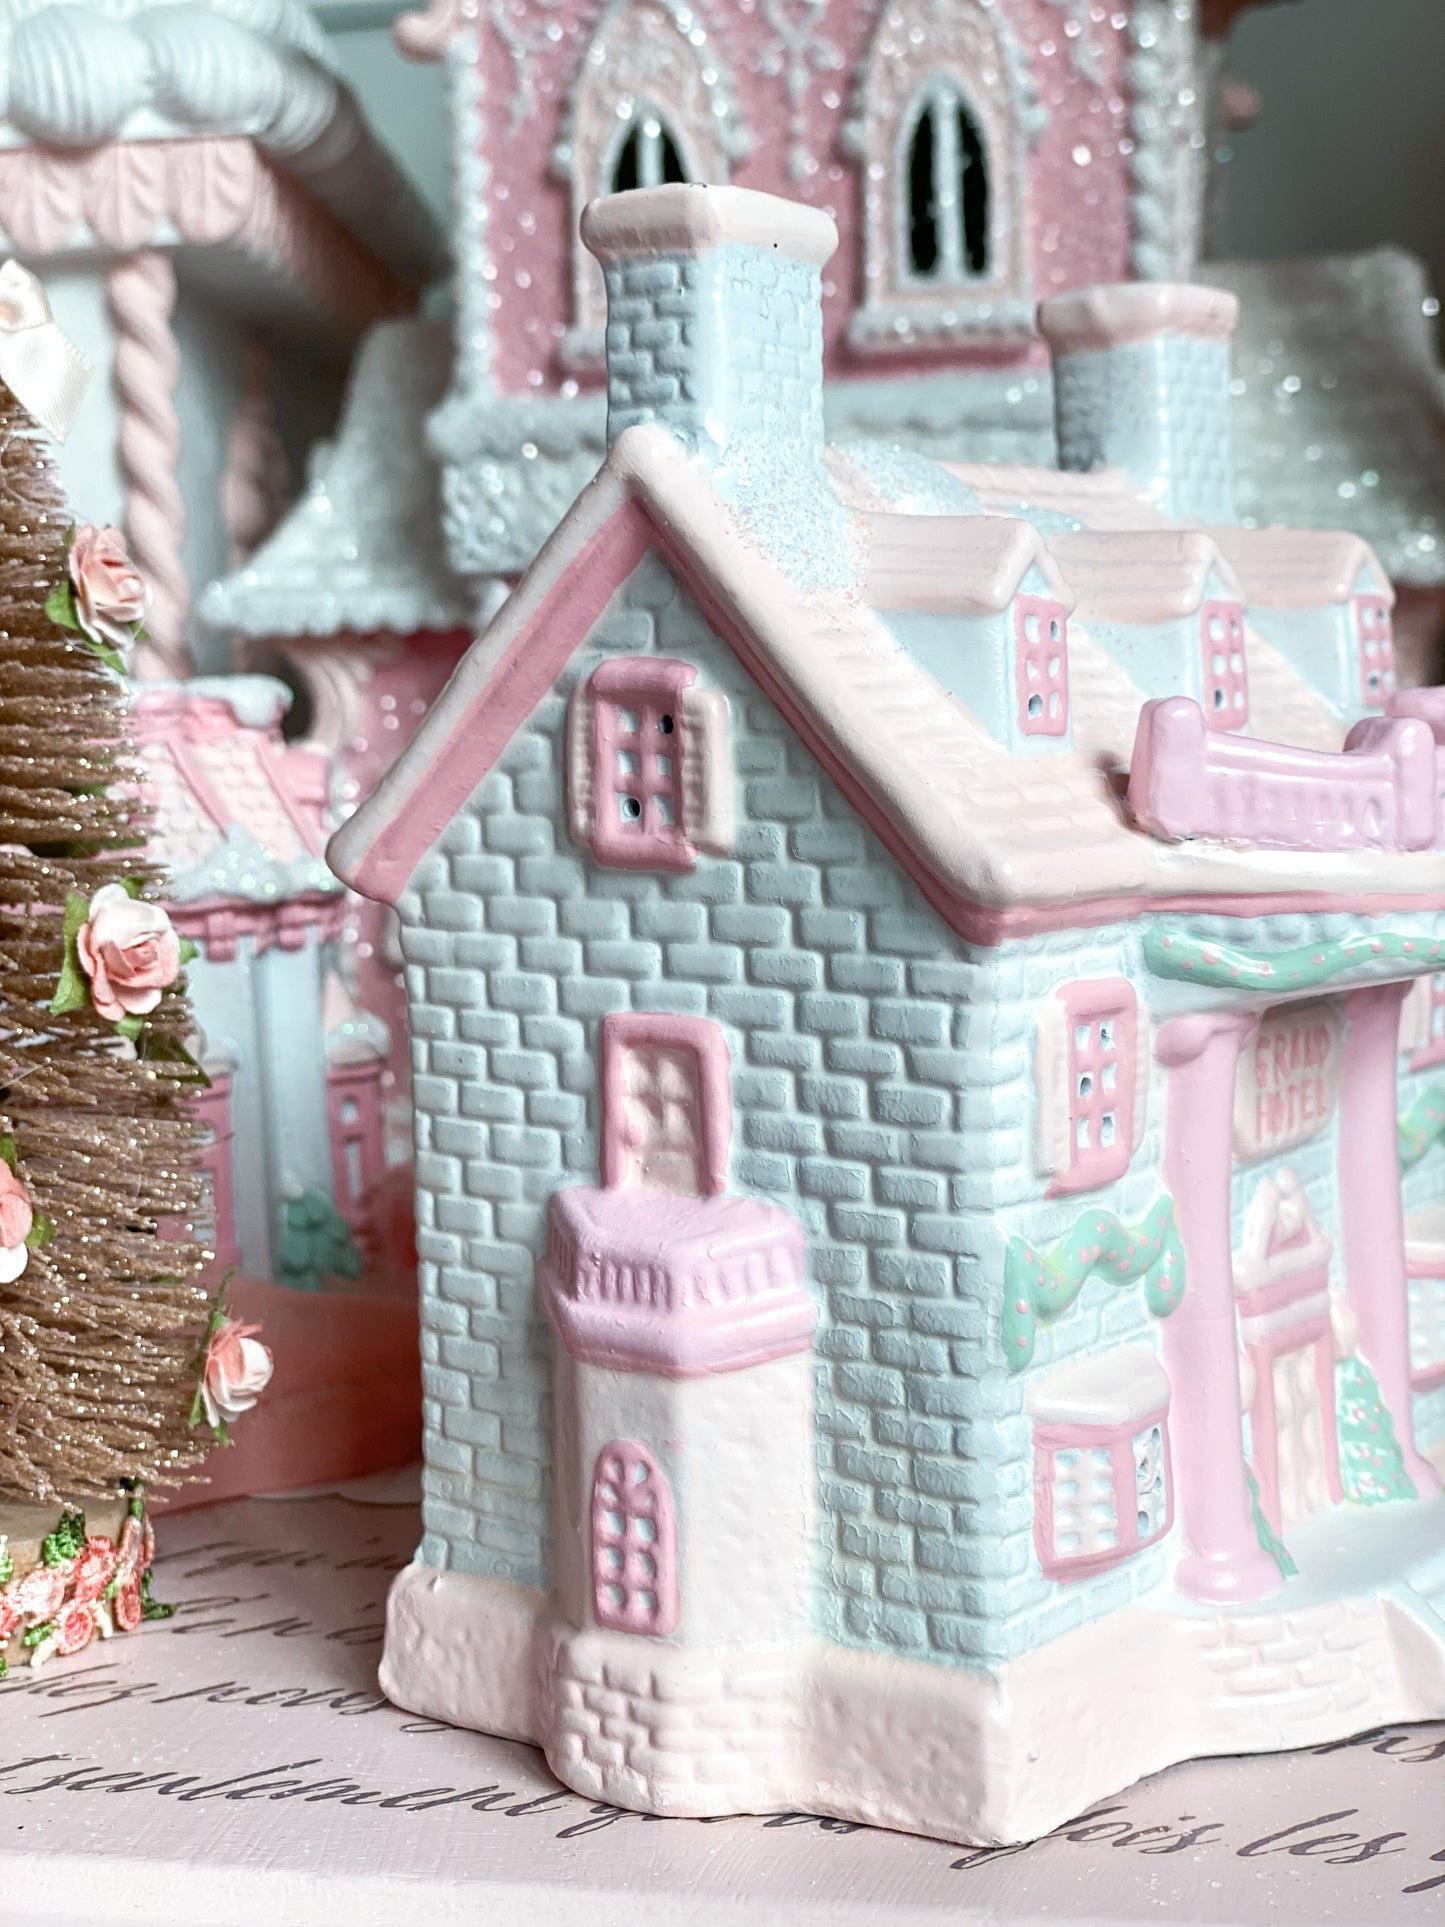 Bespoke Hand Painted Pastel Pink and White Christmas Village Antebellum Grand Hotel